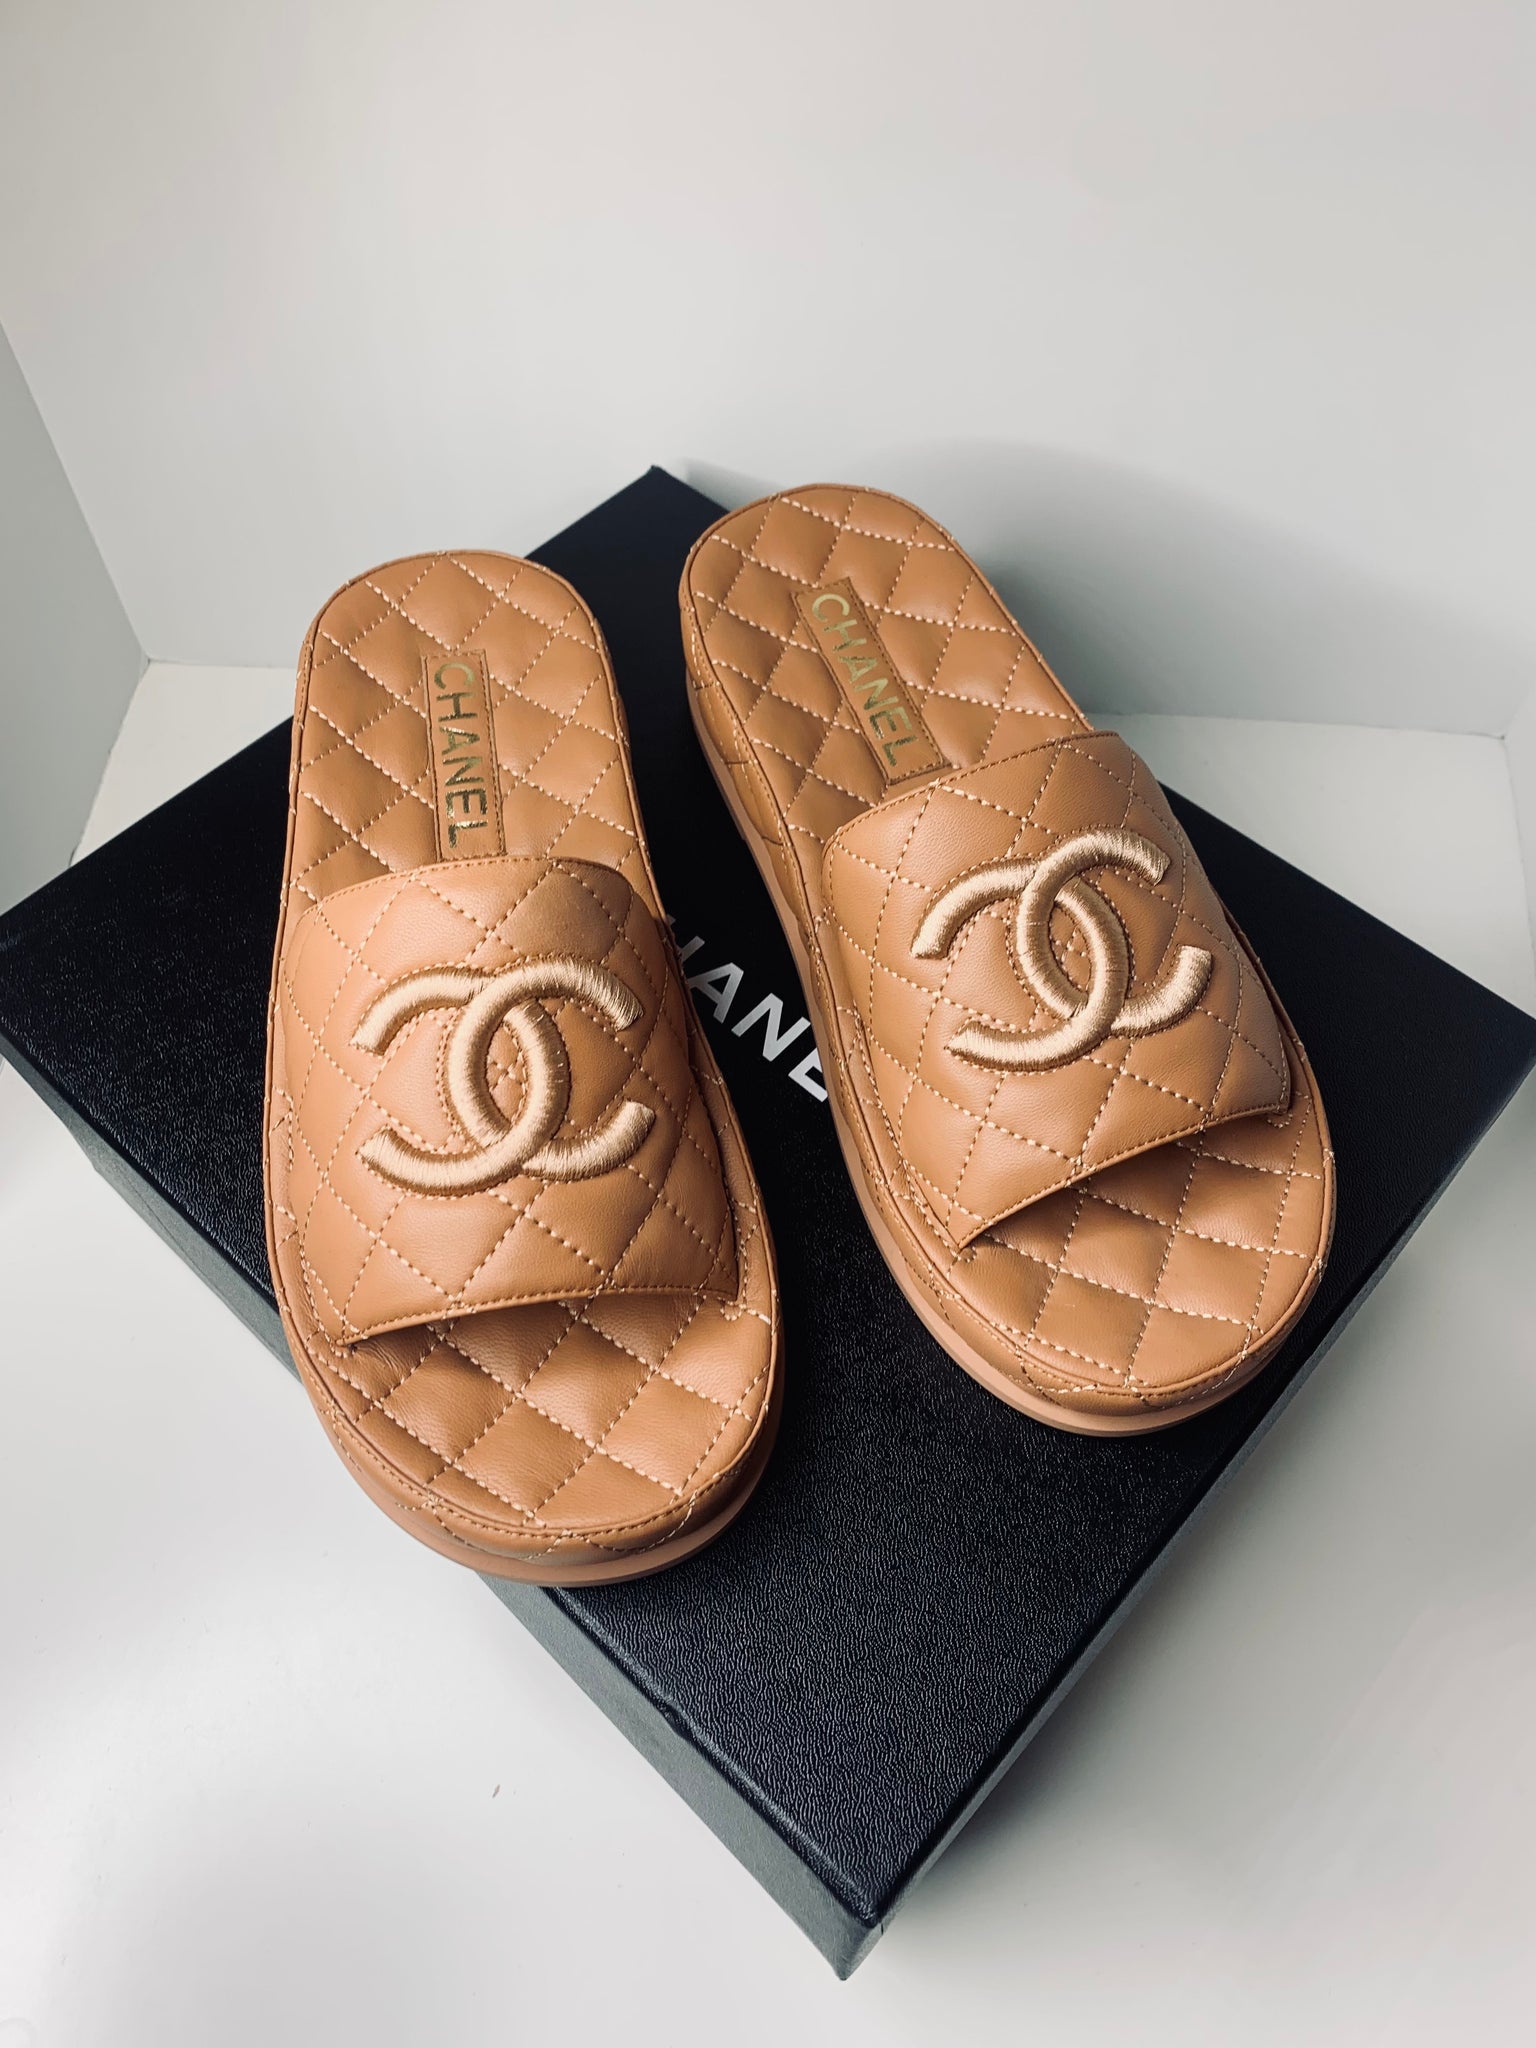 CHANEL, Shoes, Authentic Chanel Lambskin Pearl Mules